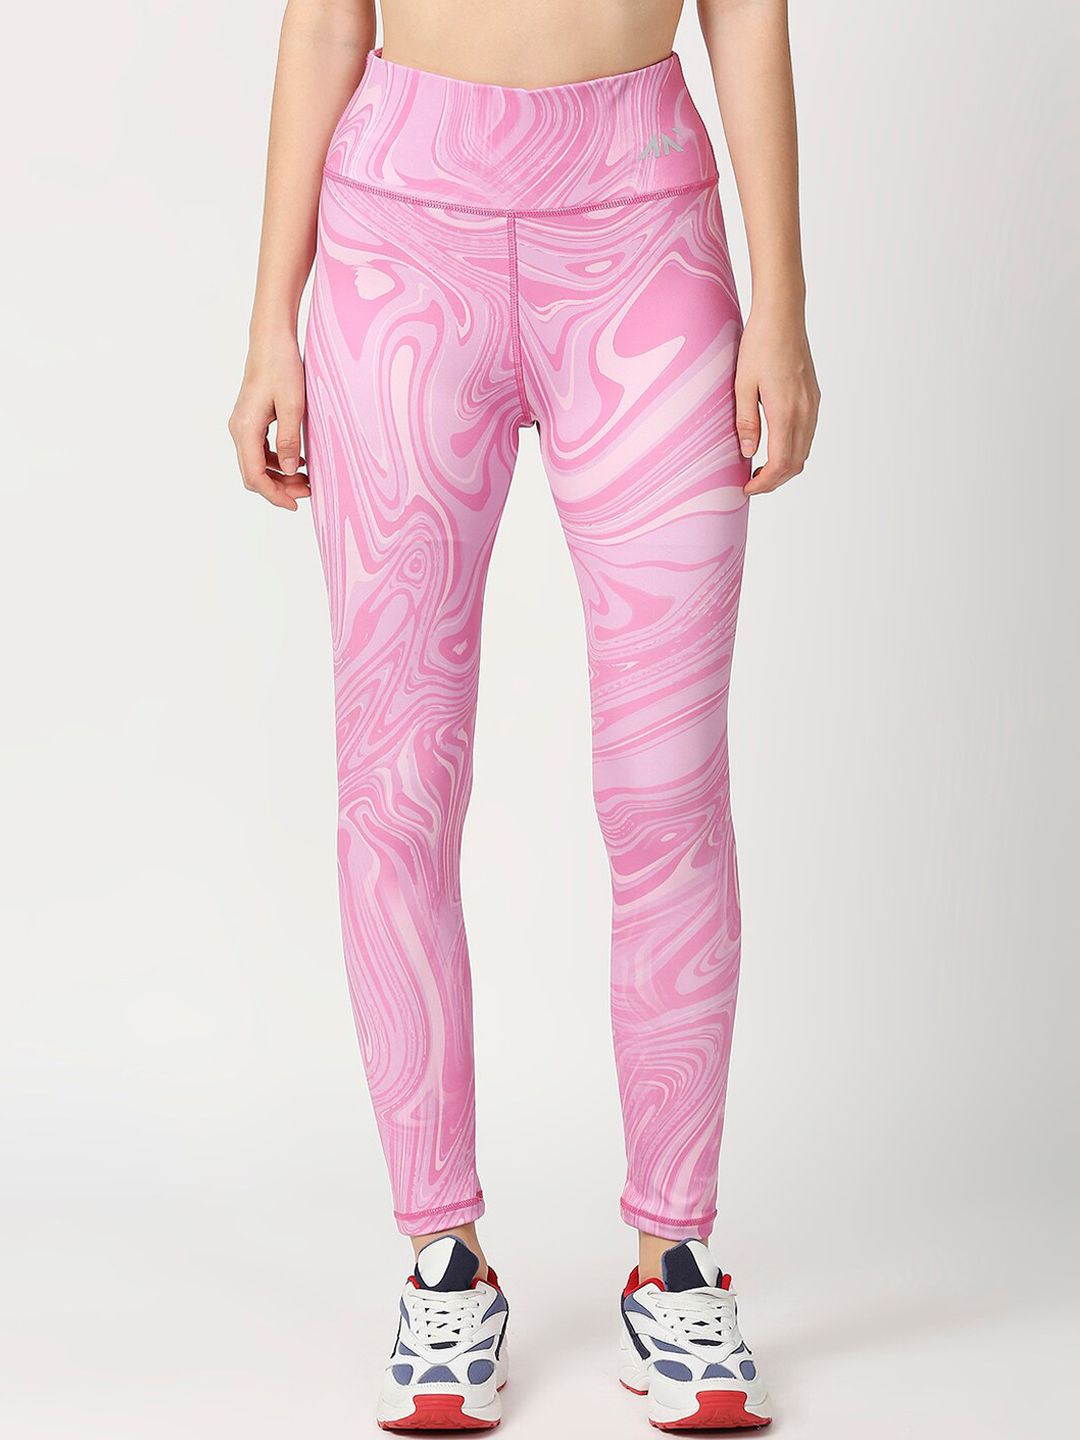 AESTHETIC NATION Women Pink & White Printed Dry Fit Tights Price in India